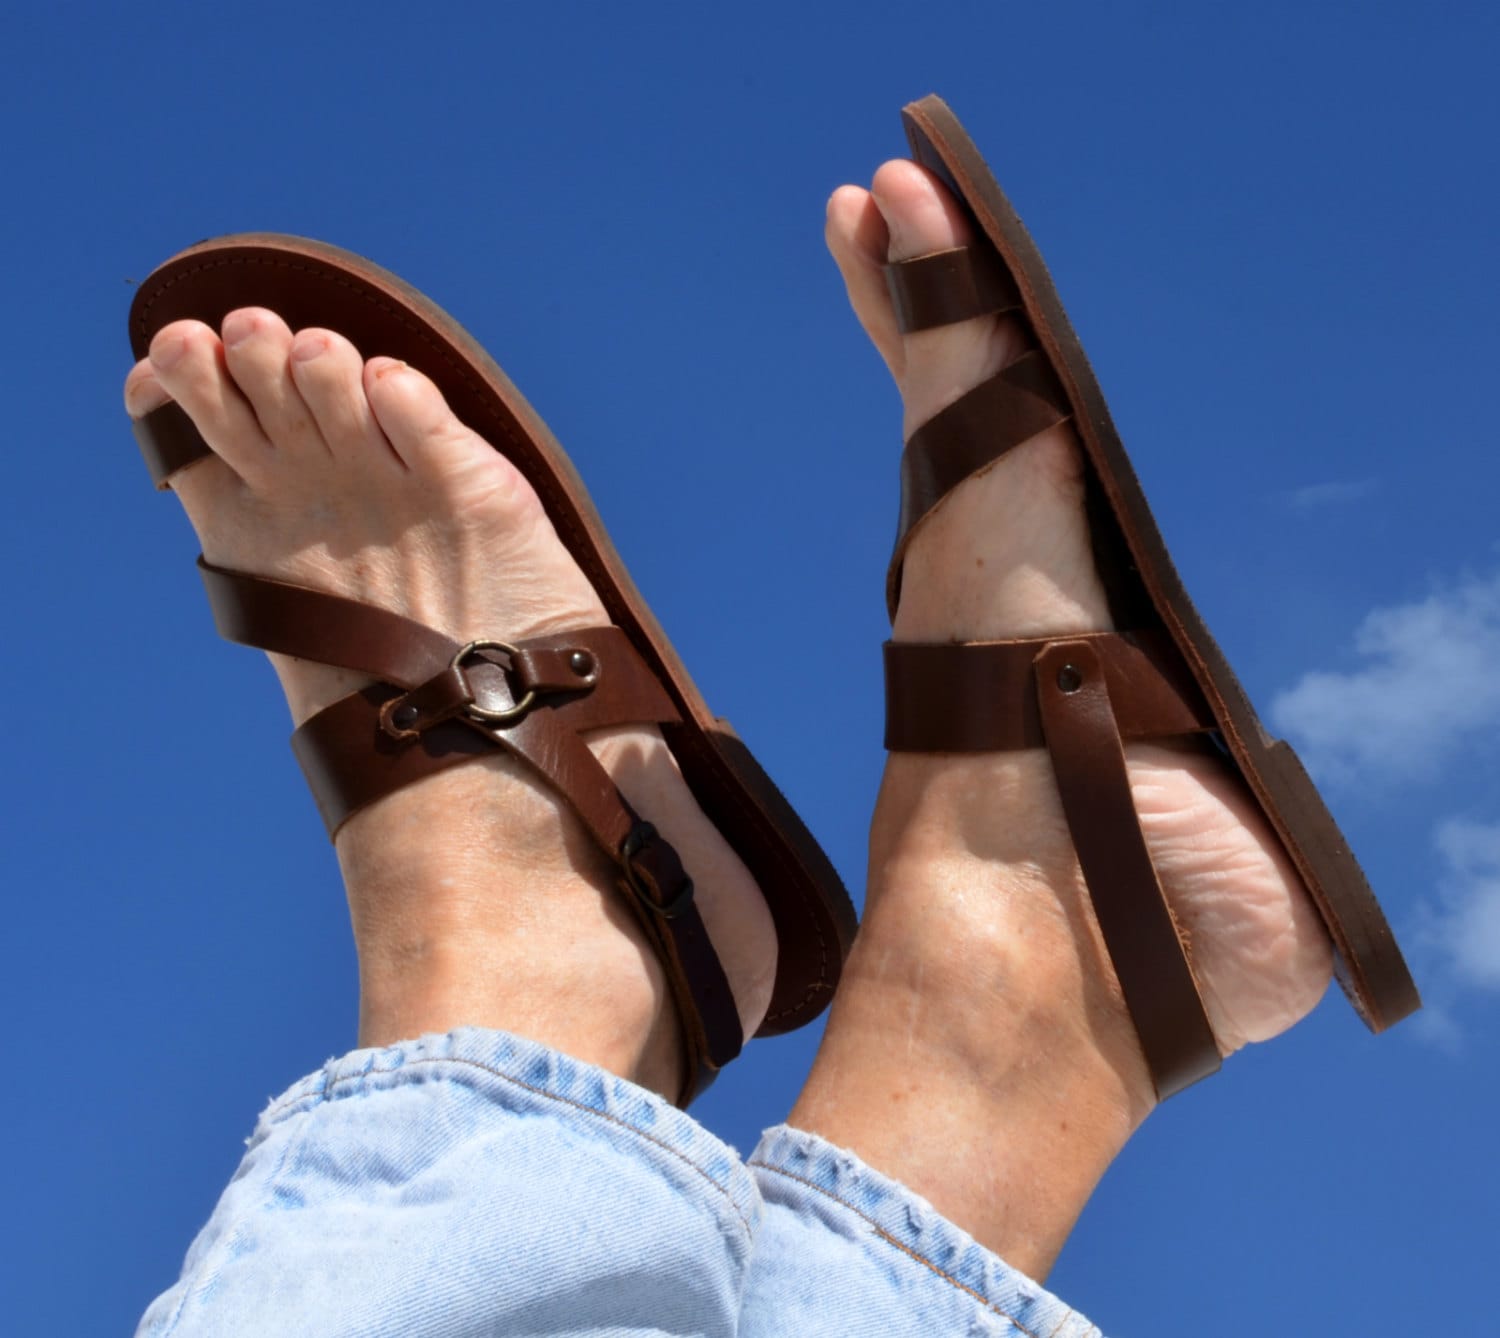 Free Shipping Shoes Mens Shoes Sandals Sport Sandals Men Sandals,Genuine Leather sandals,Sport Sandals,MAXIMOS Sandals Men brown sandals Handmade Sandals Greek leather sandals 